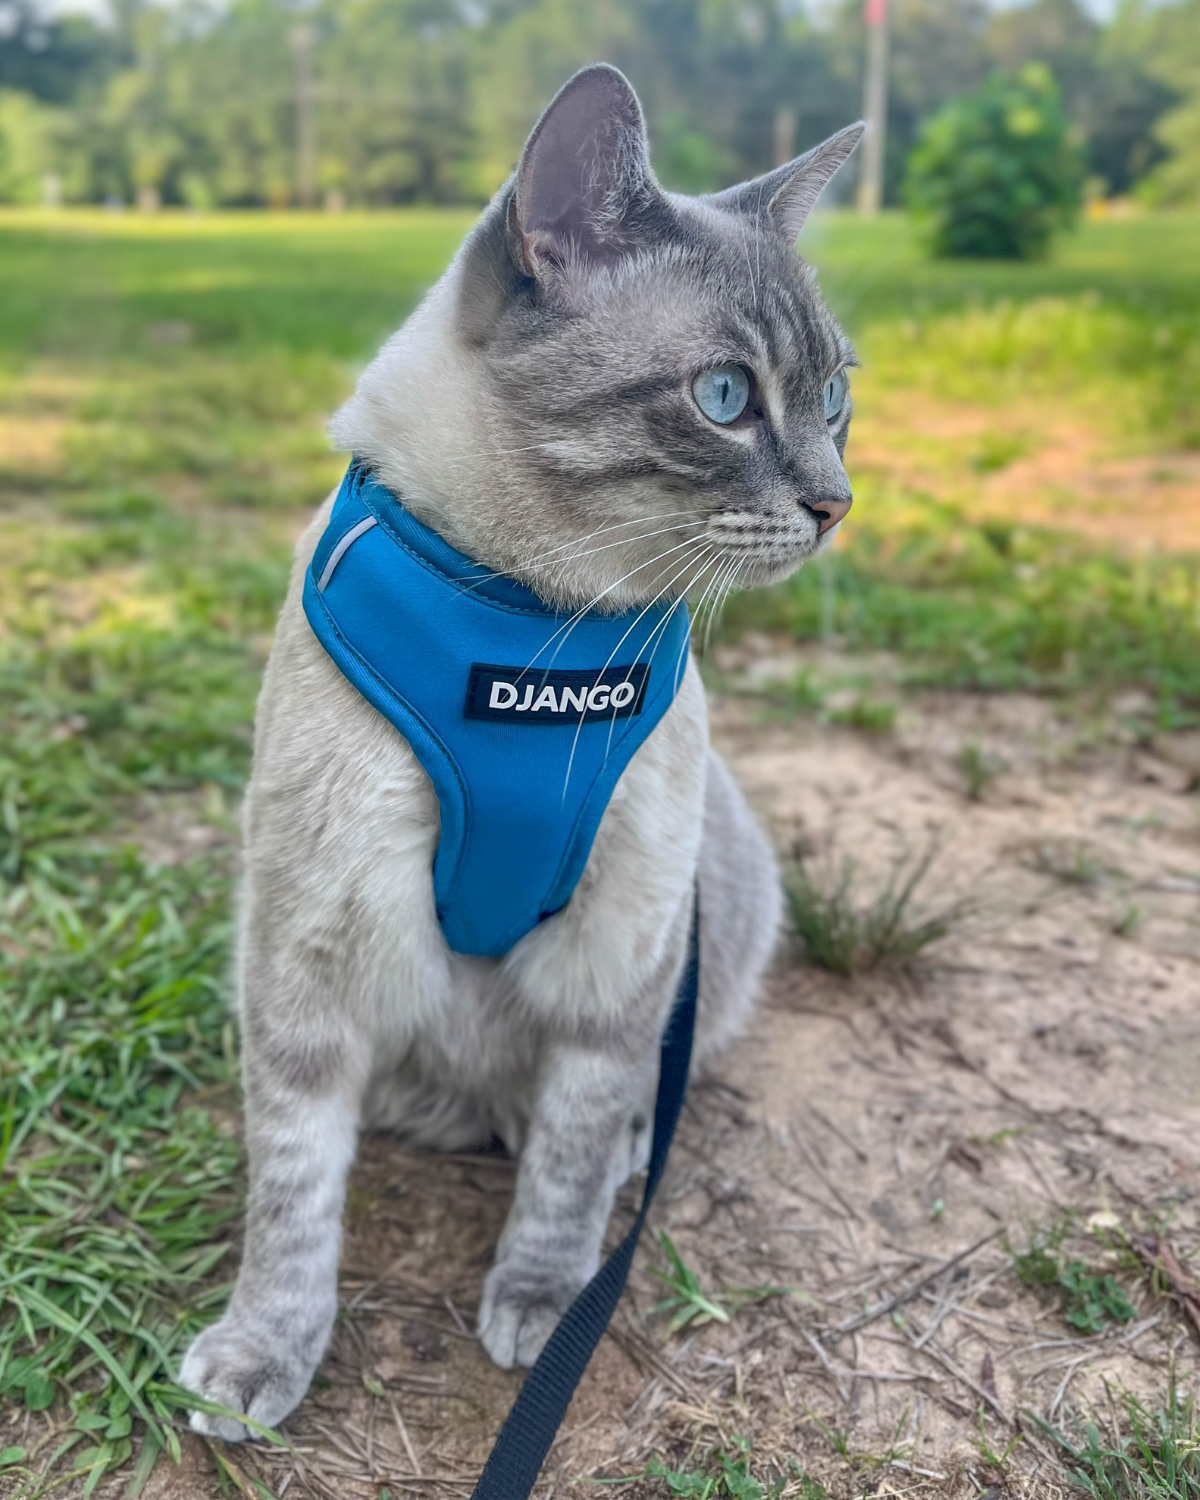 Talulah the adventure cat is a rescue cat, cricket-slaying, nature loving, adventuring queen. She wears size small in DJANGO Adventure Cat Harnesses - djangobrand.com